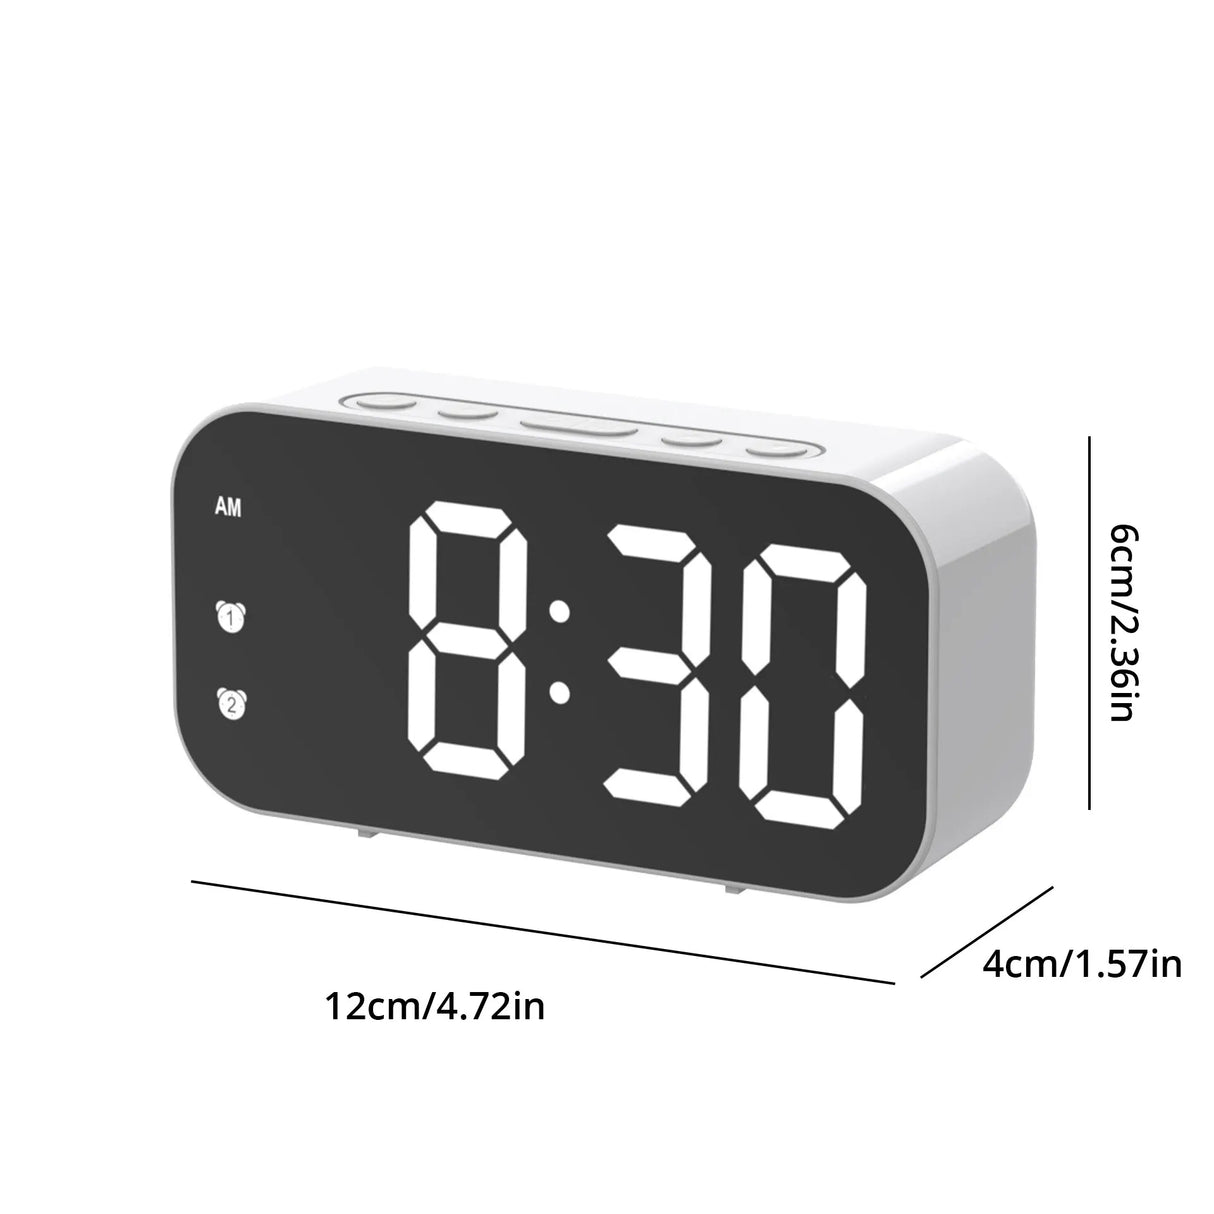 LED Mirror Alarm Clock with Temperature Display and Snooze Function